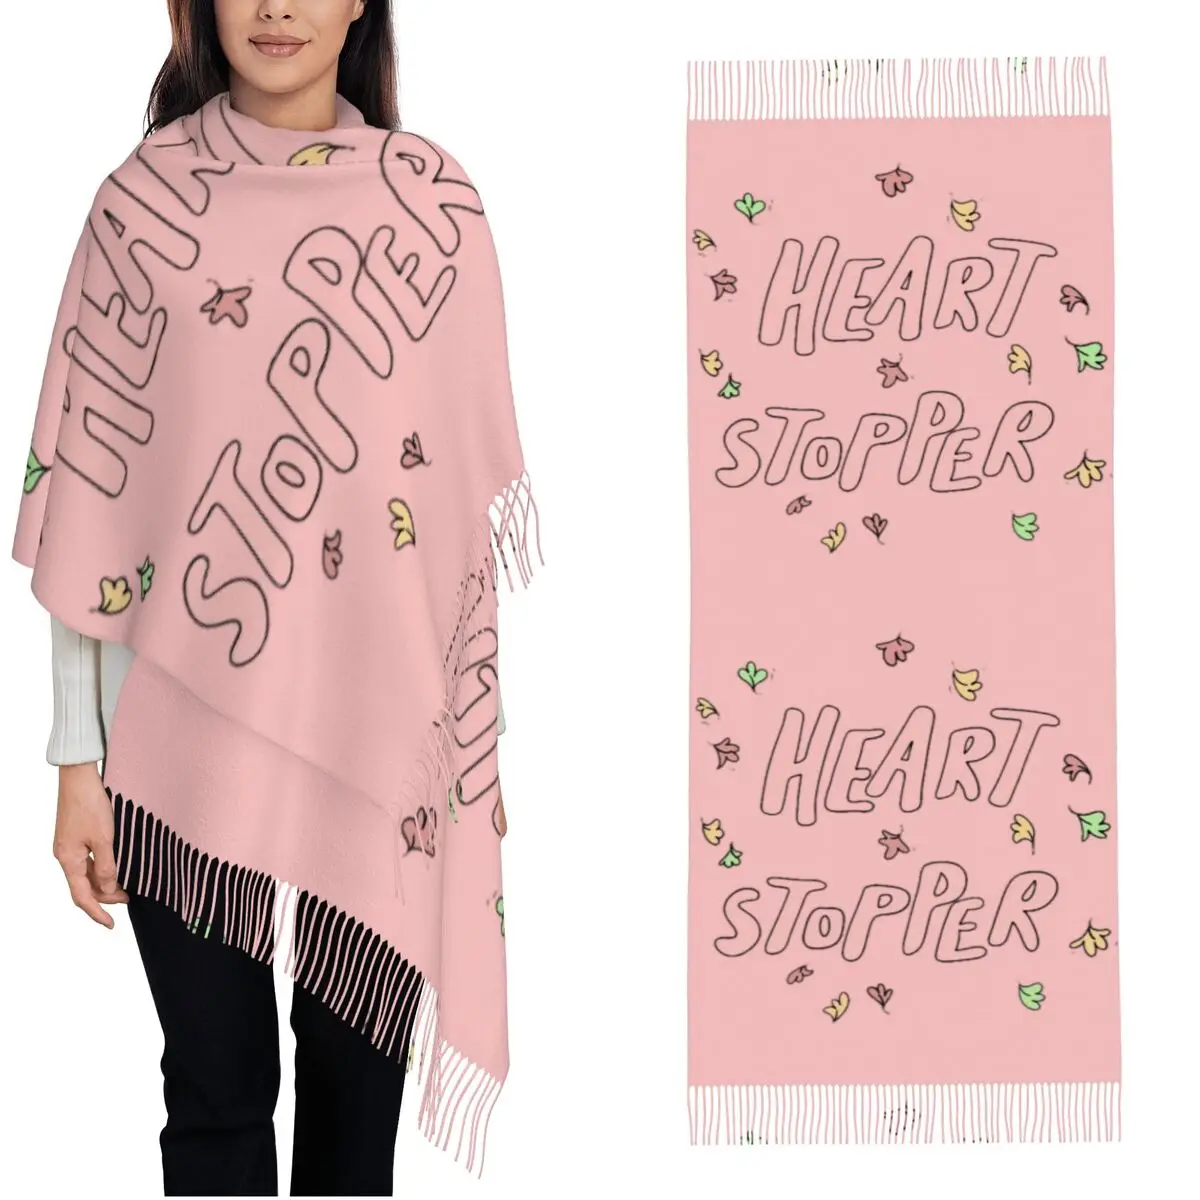 

Heartstopper Comedy Scarf for Women Winter Warm Shawls and Wrap Charlie And Nick Long Large Shawl Scarf Lightweight